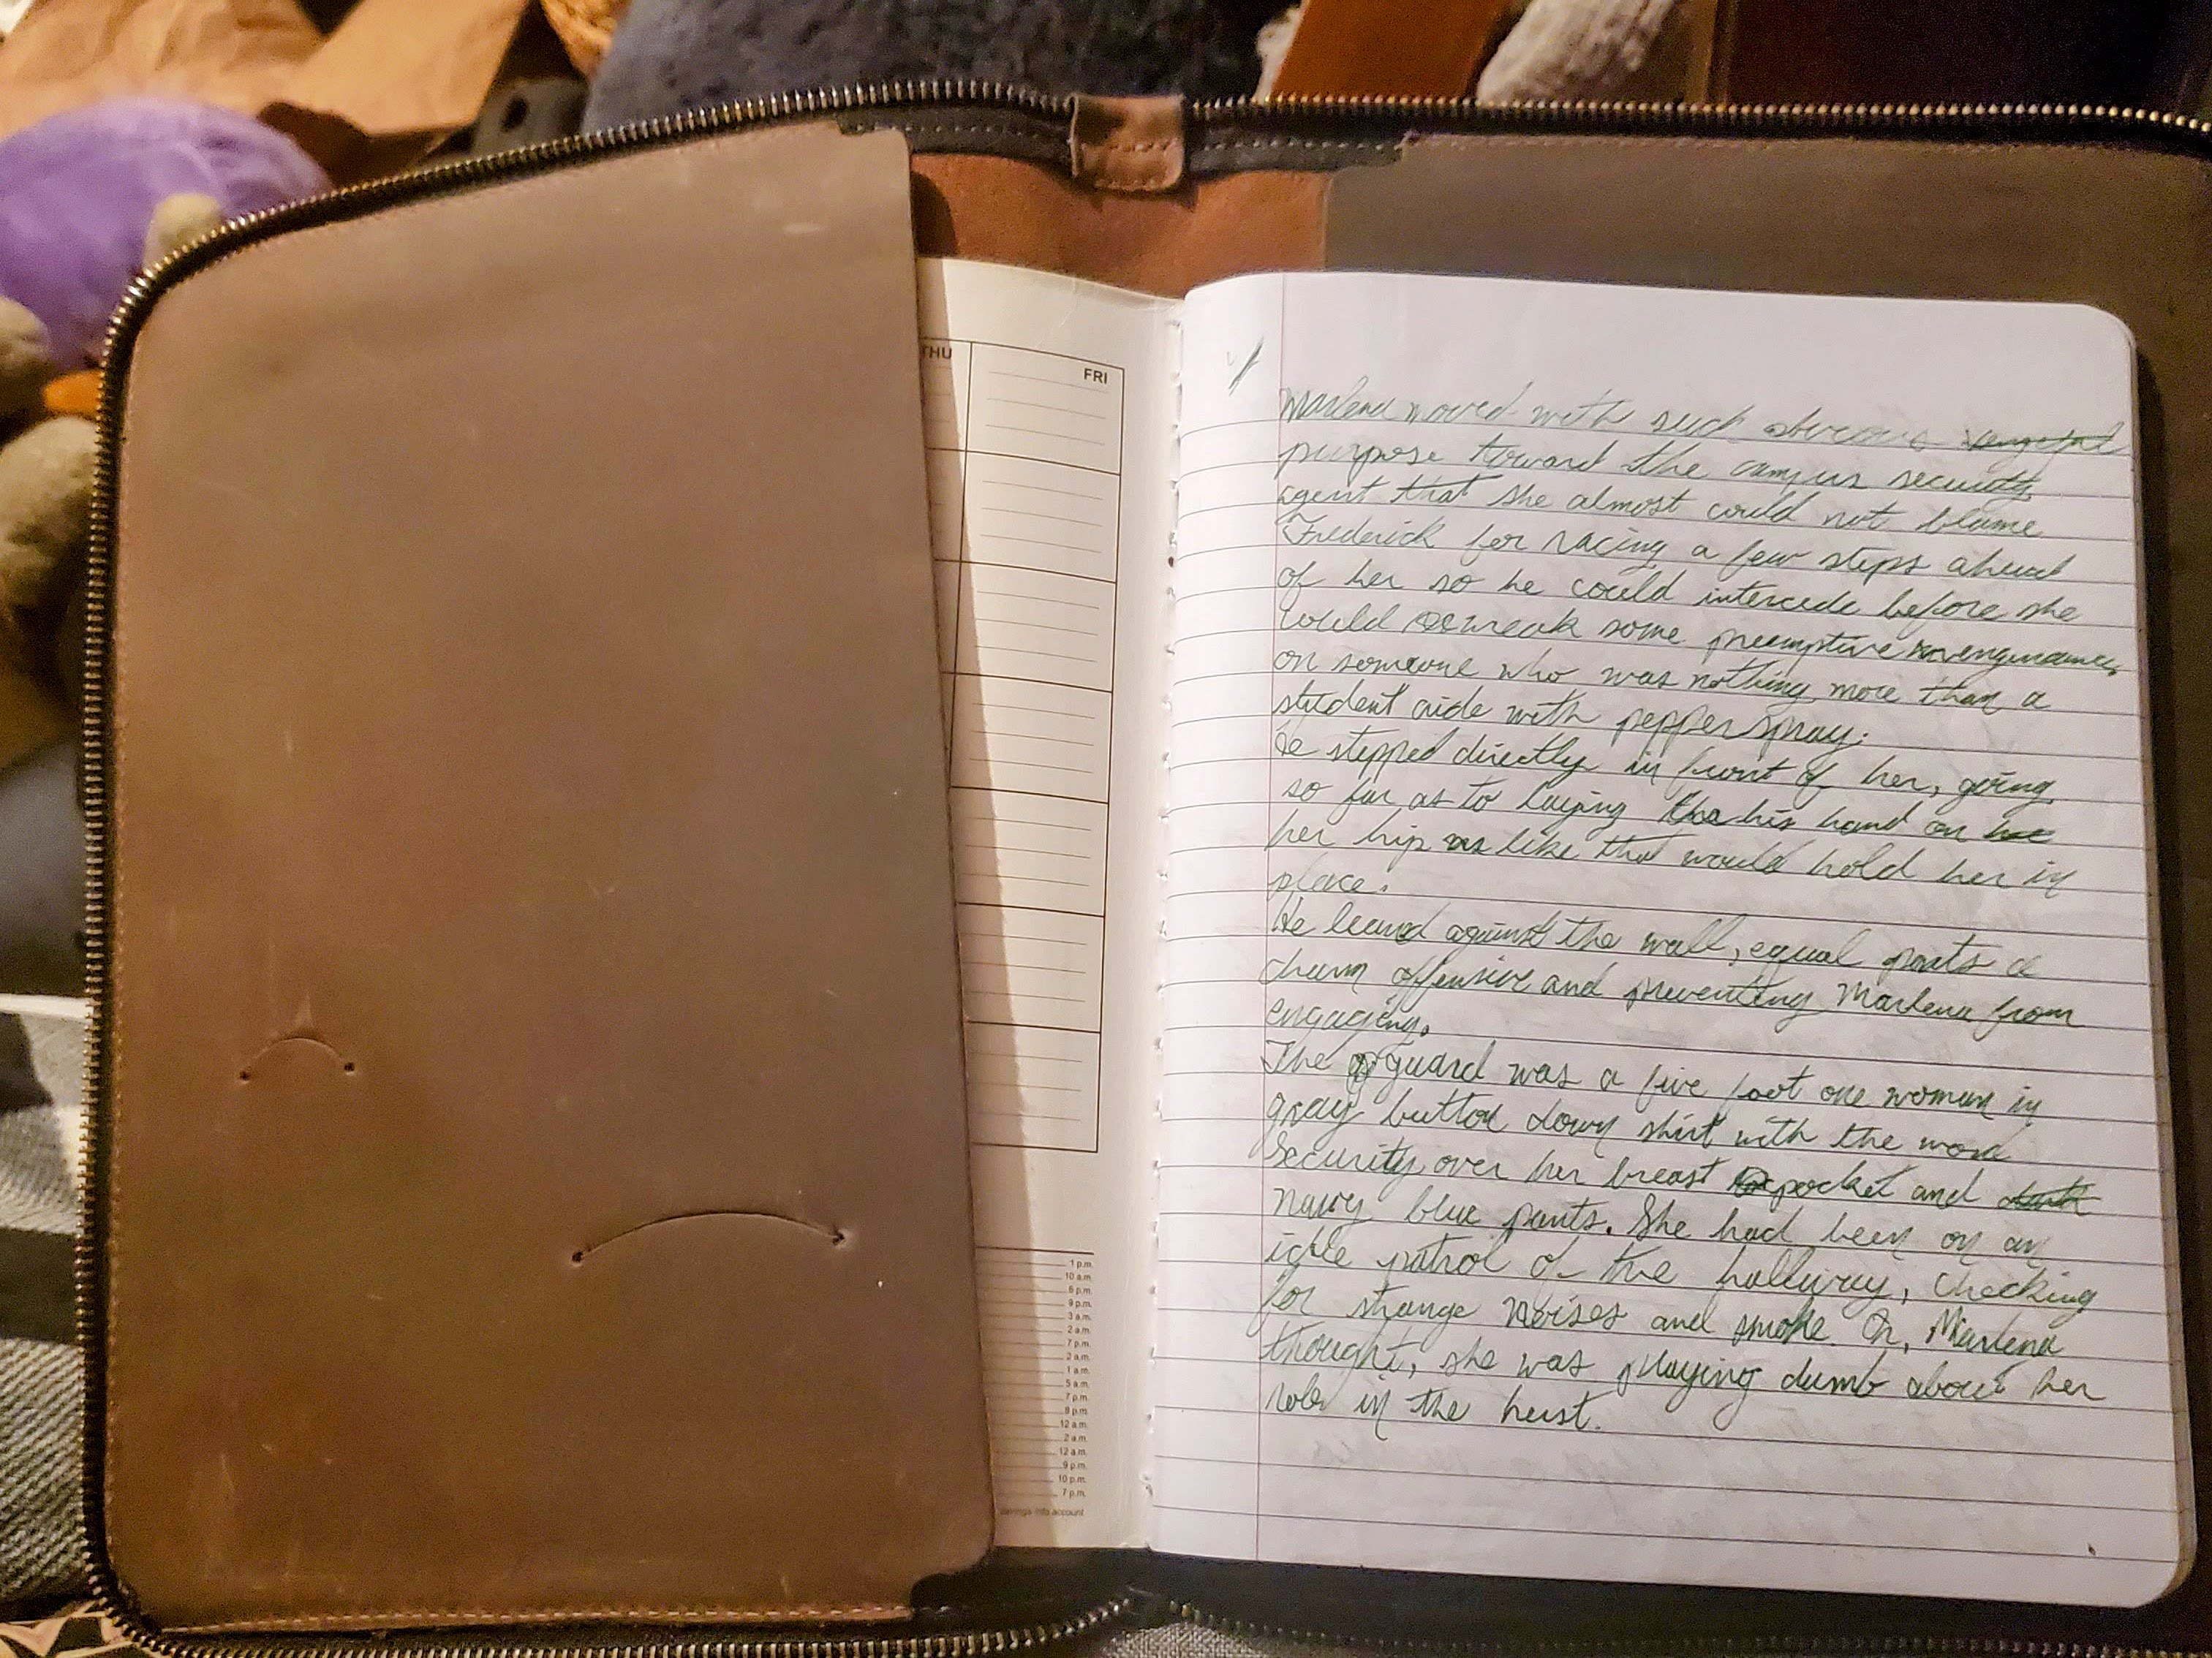 A composition notebook with green writing in it with a leather cover